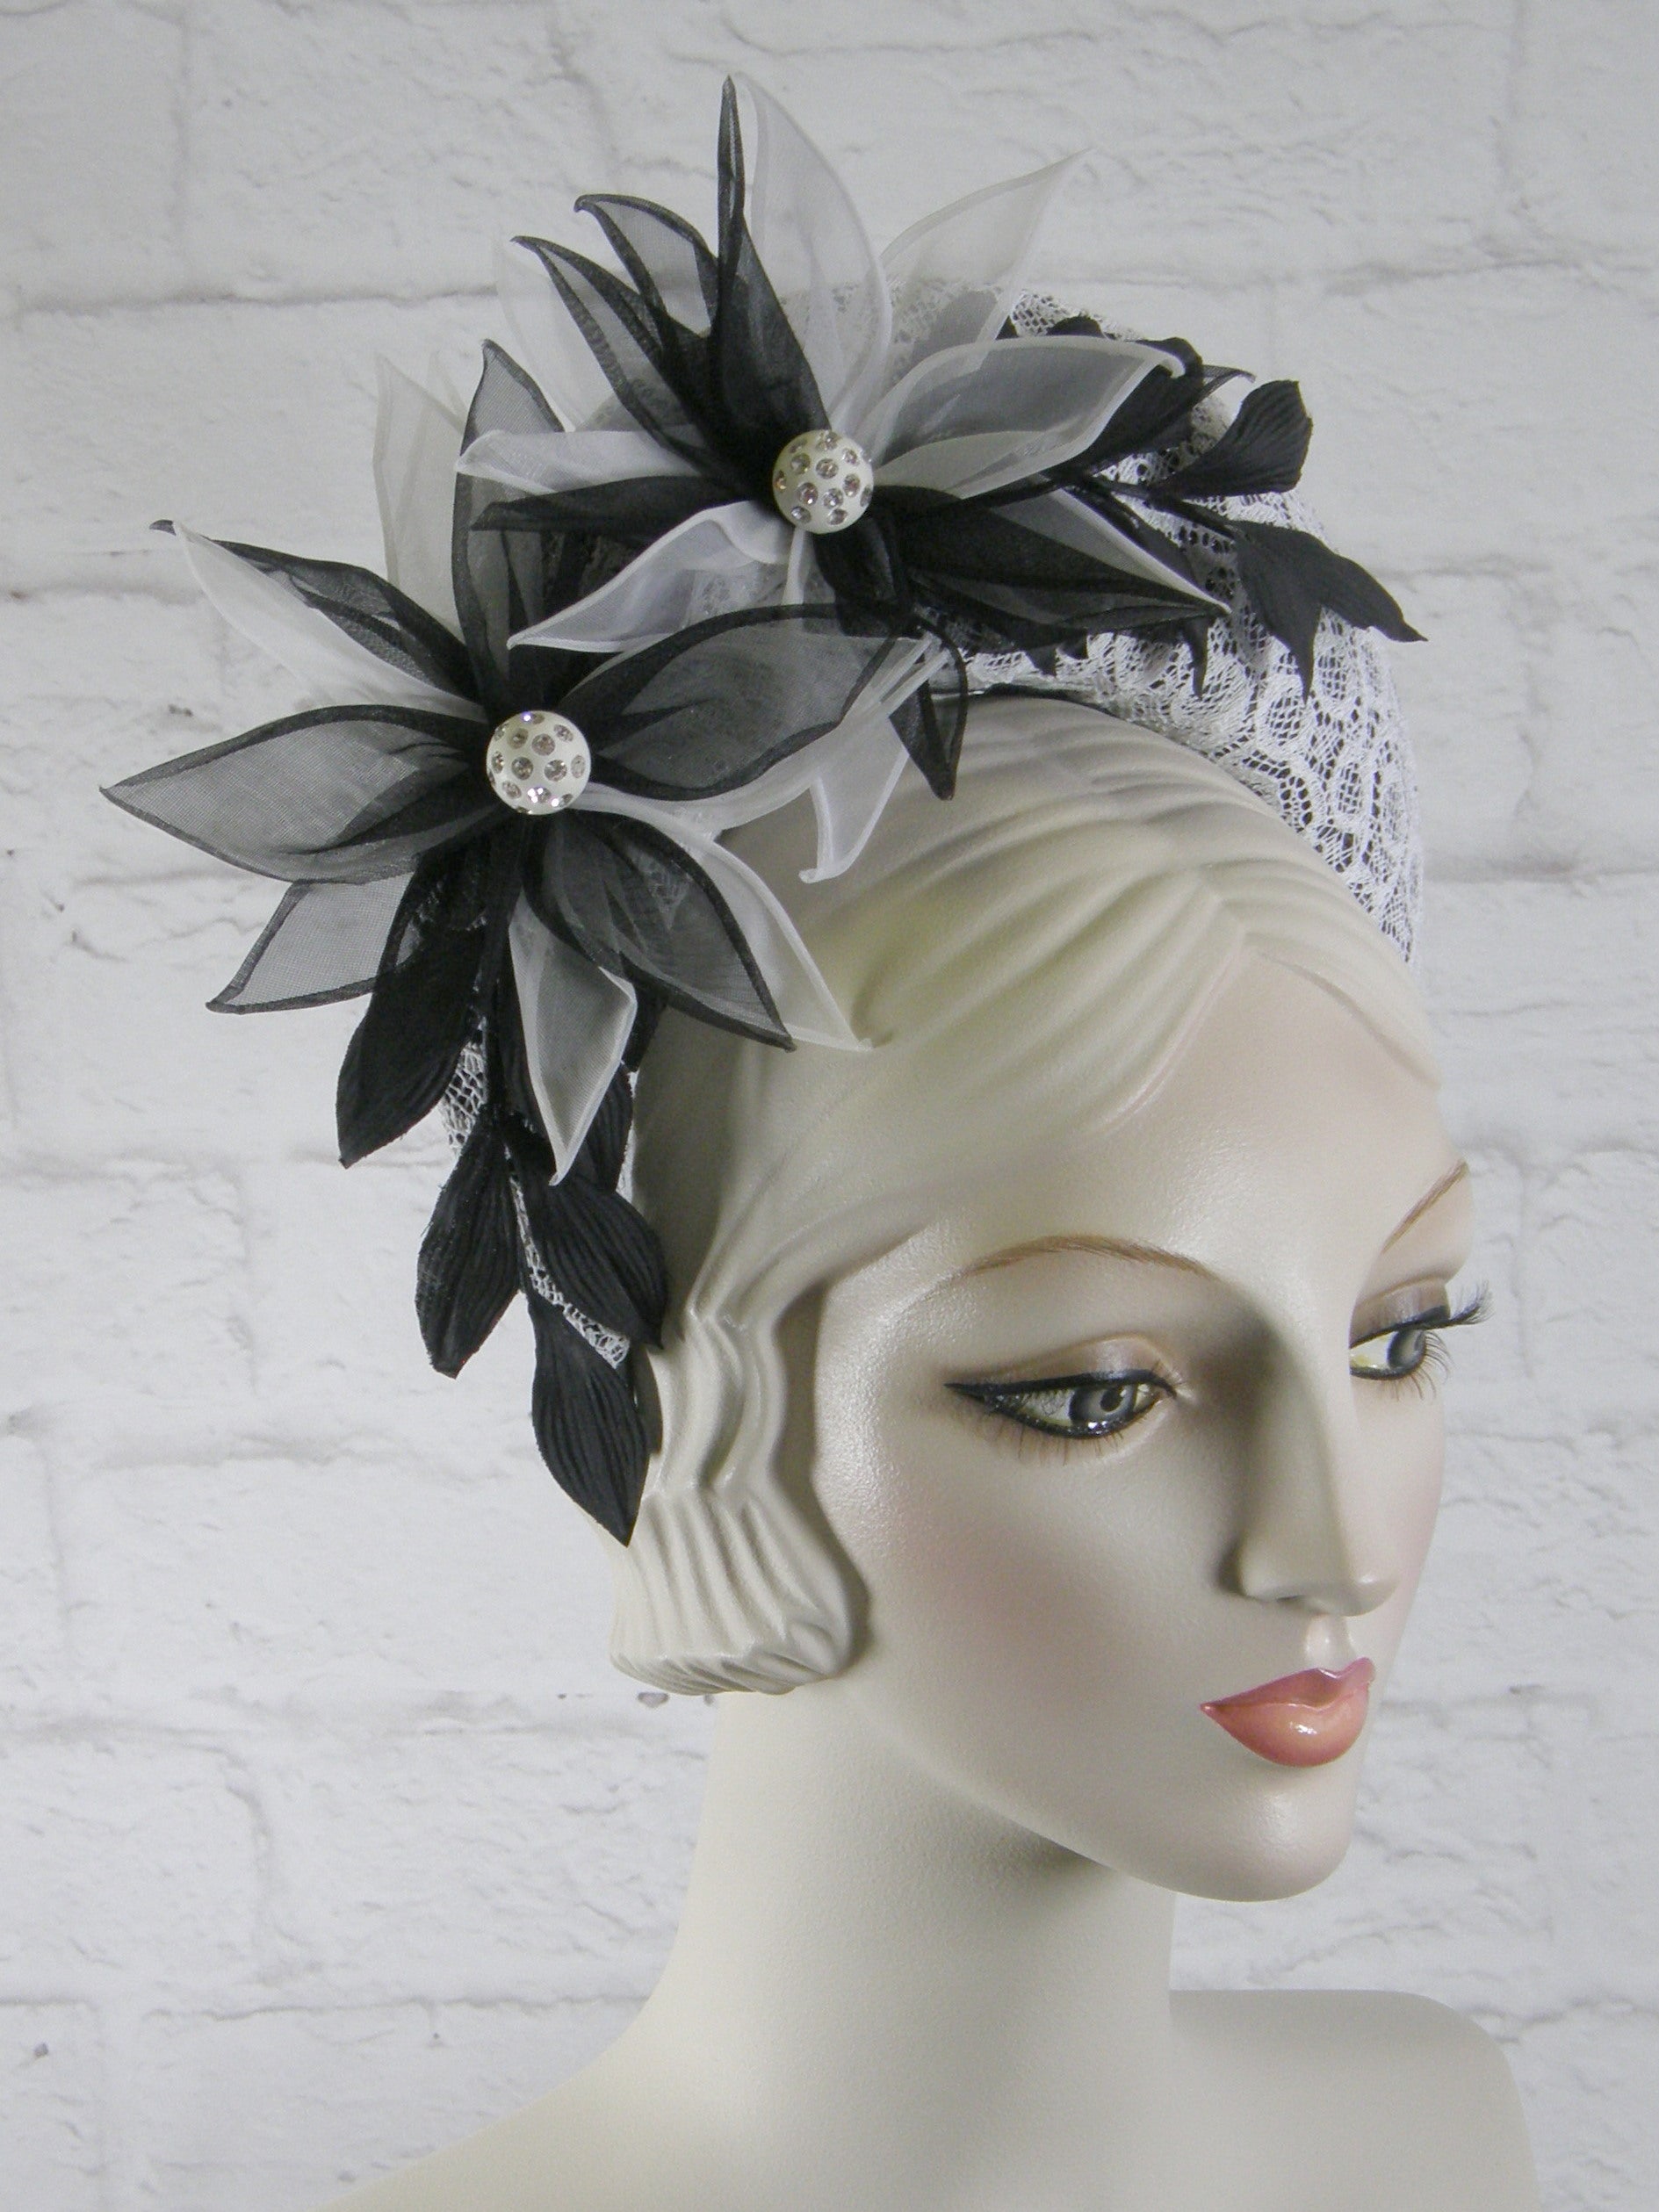 Tiara Halo Style Fascinator in Black and White with Vintage Lace